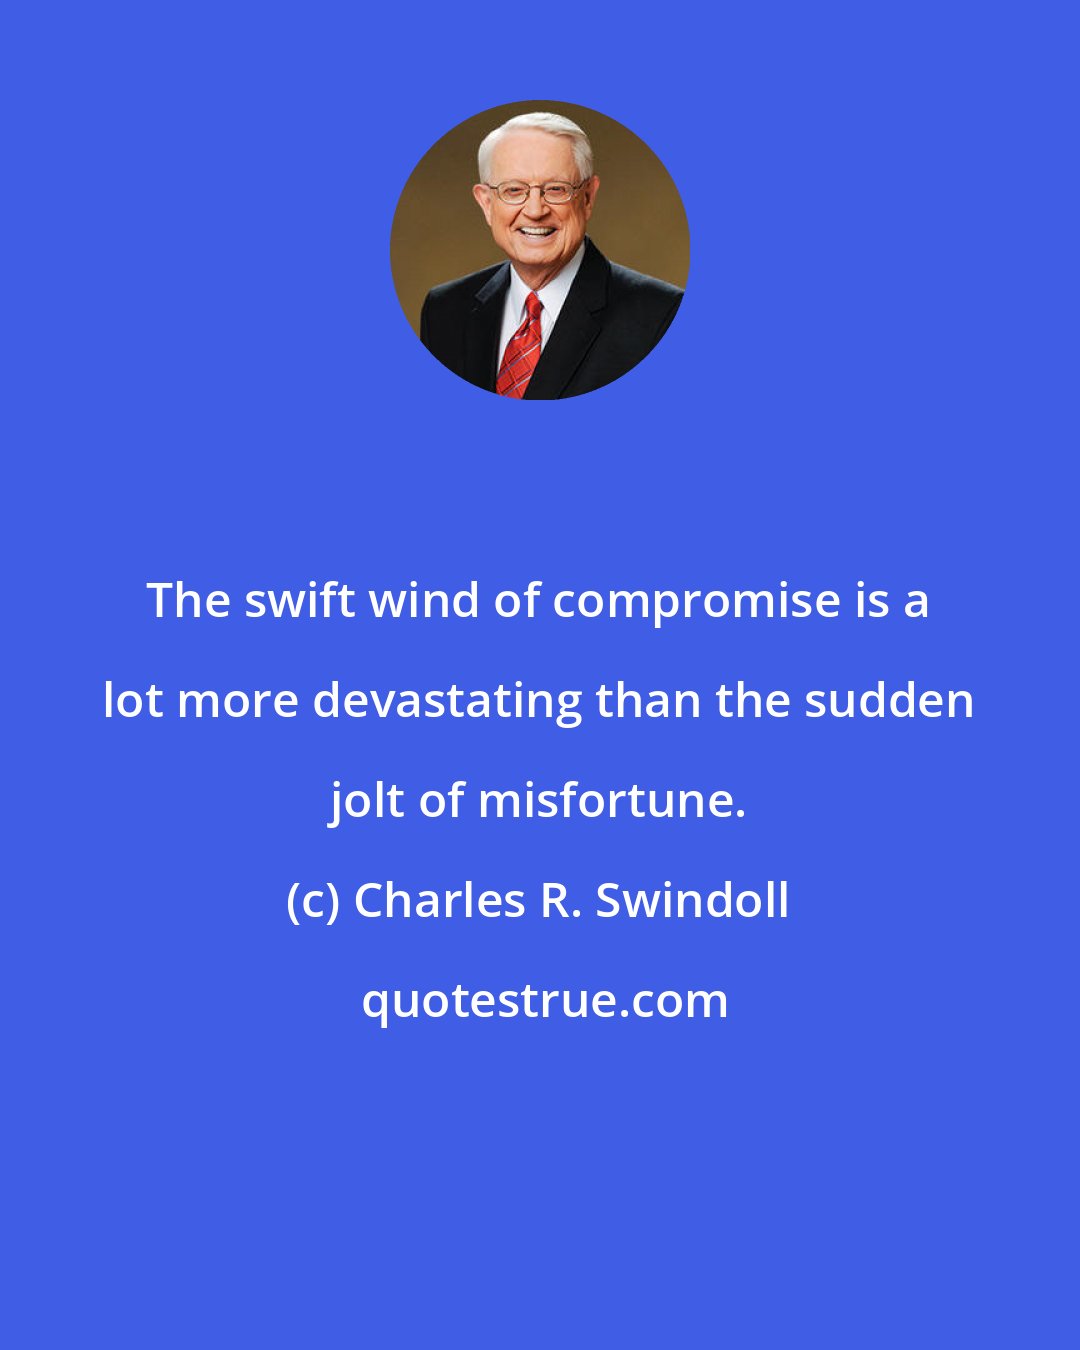 Charles R. Swindoll: The swift wind of compromise is a lot more devastating than the sudden jolt of misfortune.